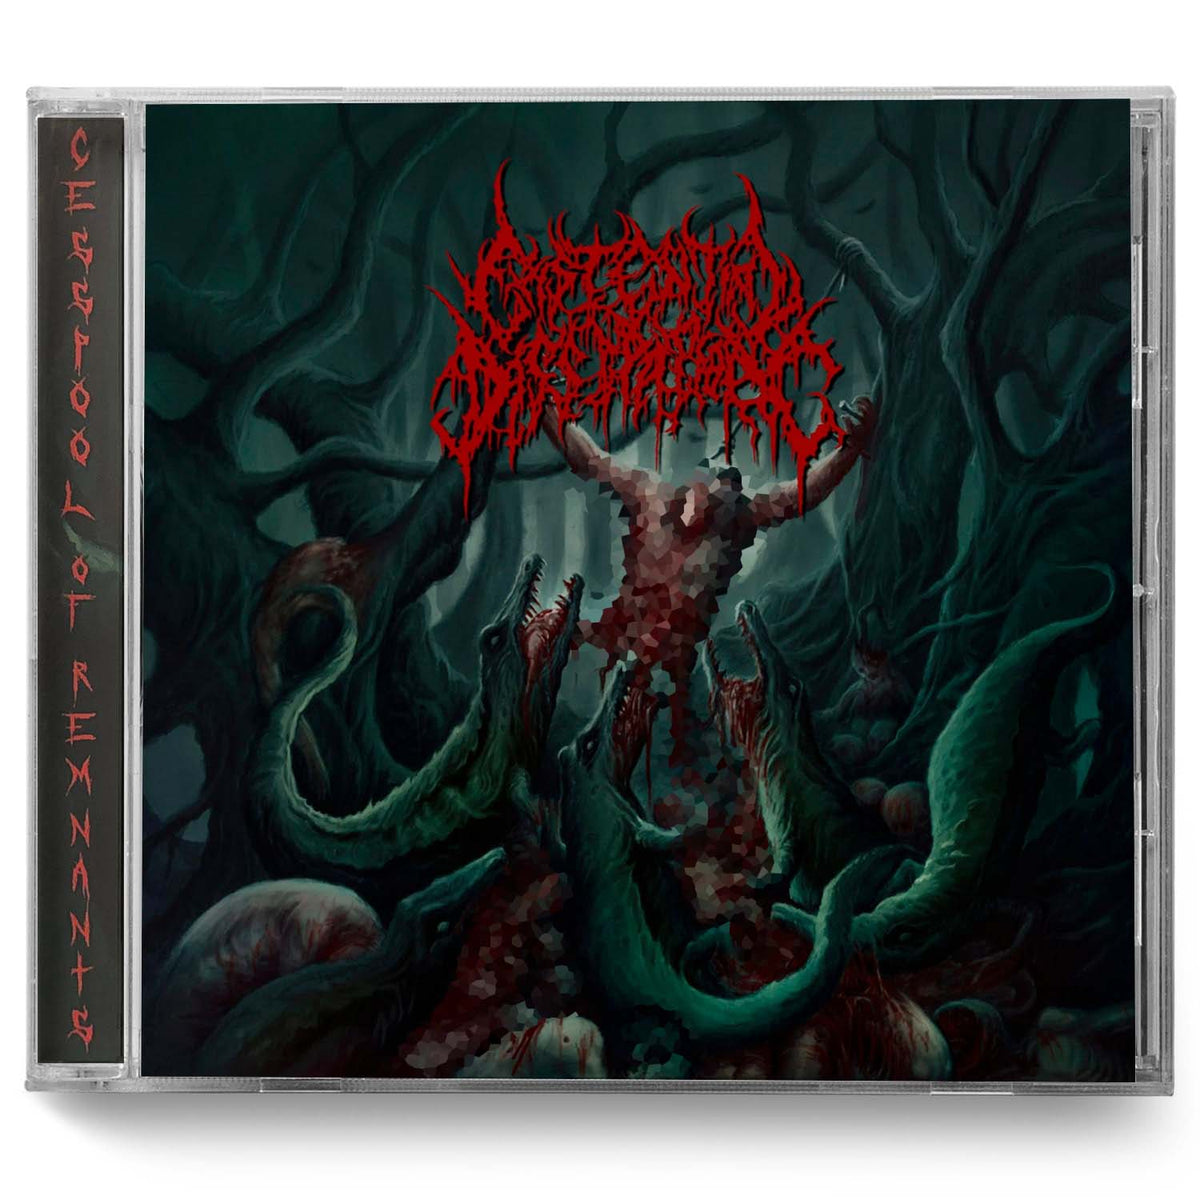 Existential Dissipation "Cesspool of Remnants" CD - Miasma Records